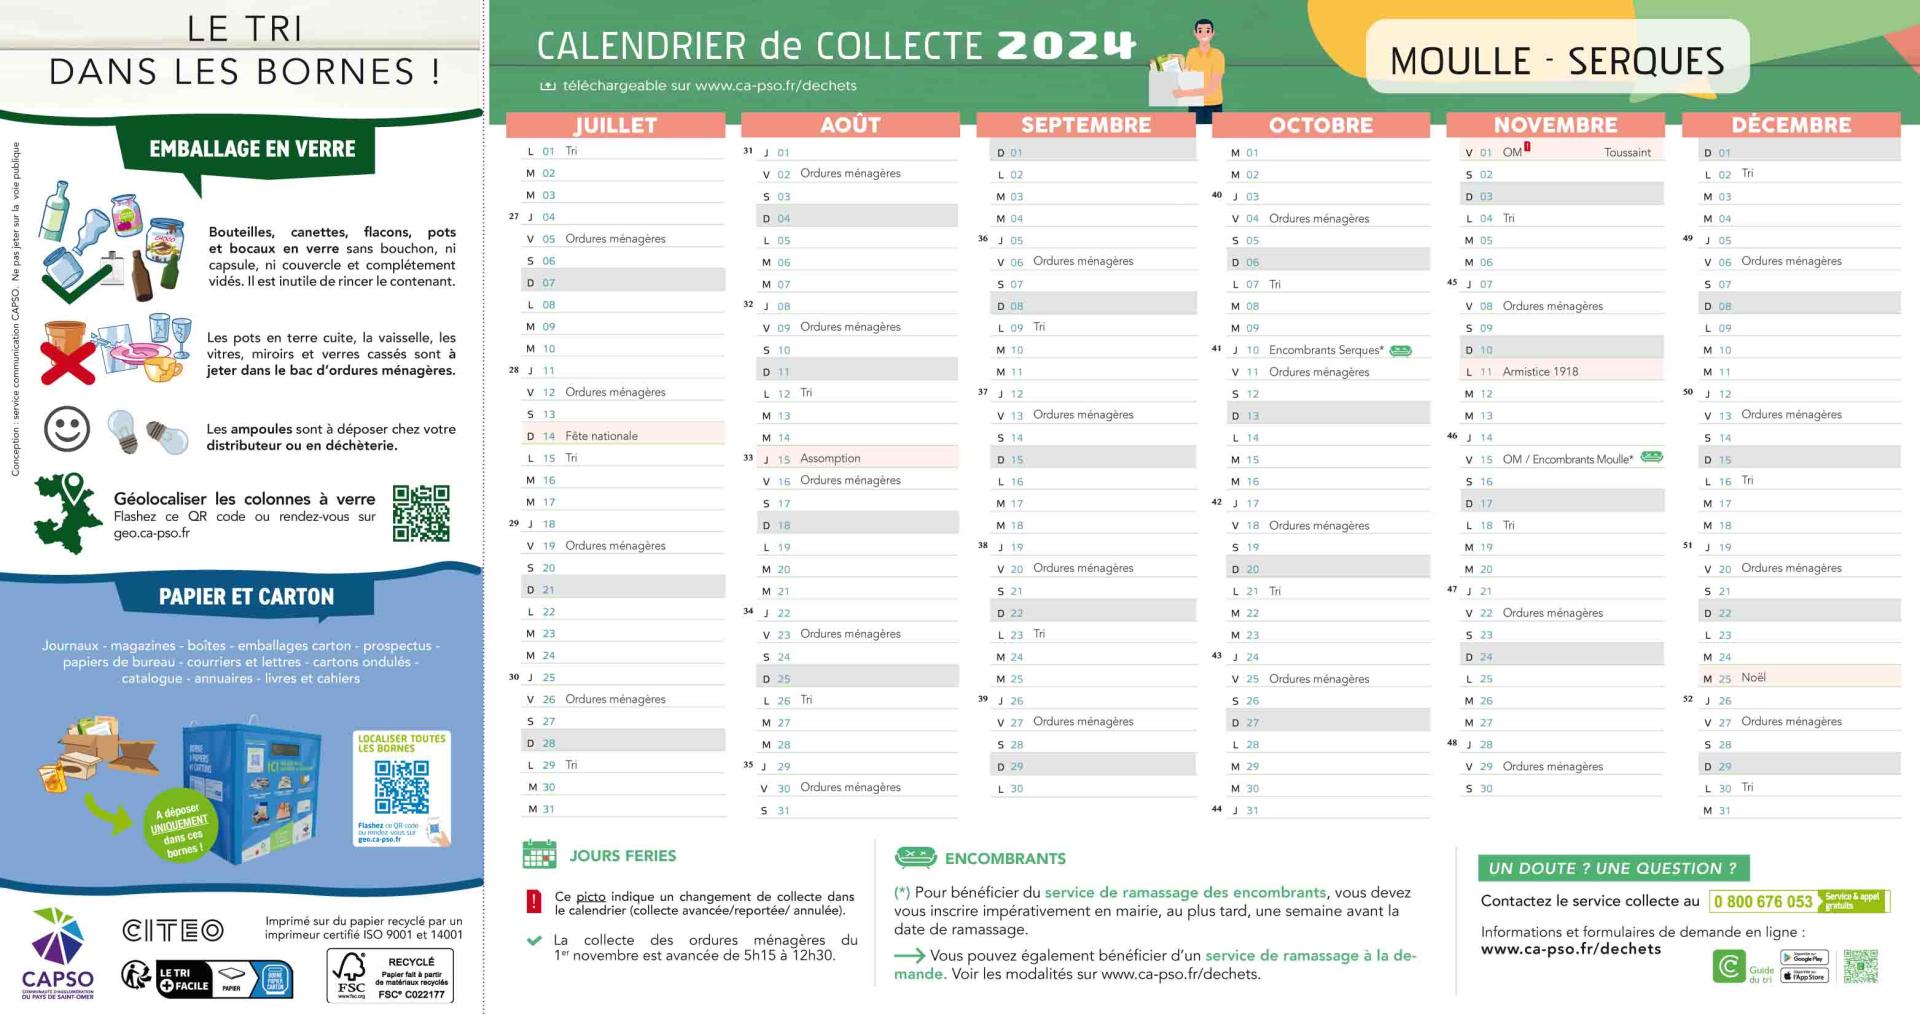 Moulle serques calendrier 2024 web 2